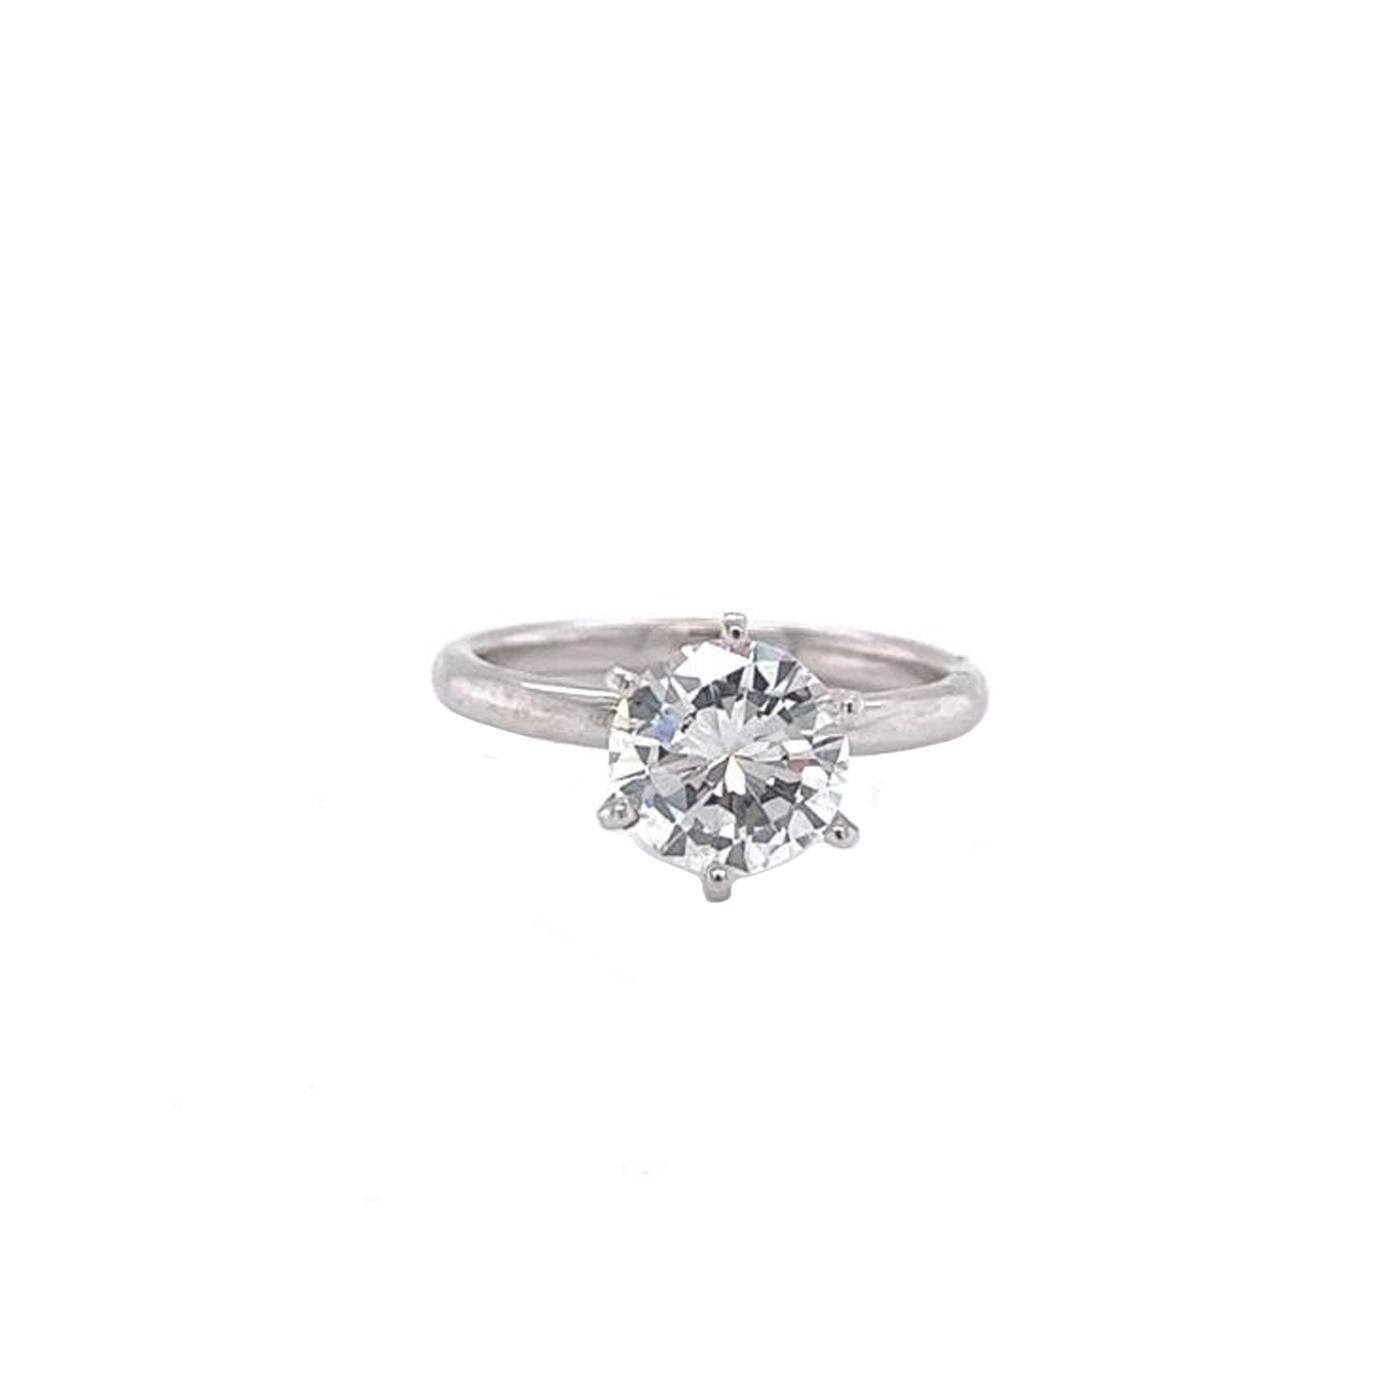 Brilliant Cut GIA Certified 1.25ct Solitaire Diamond Ring 14k Gold VS1 Clarity Natural H Color For Sale